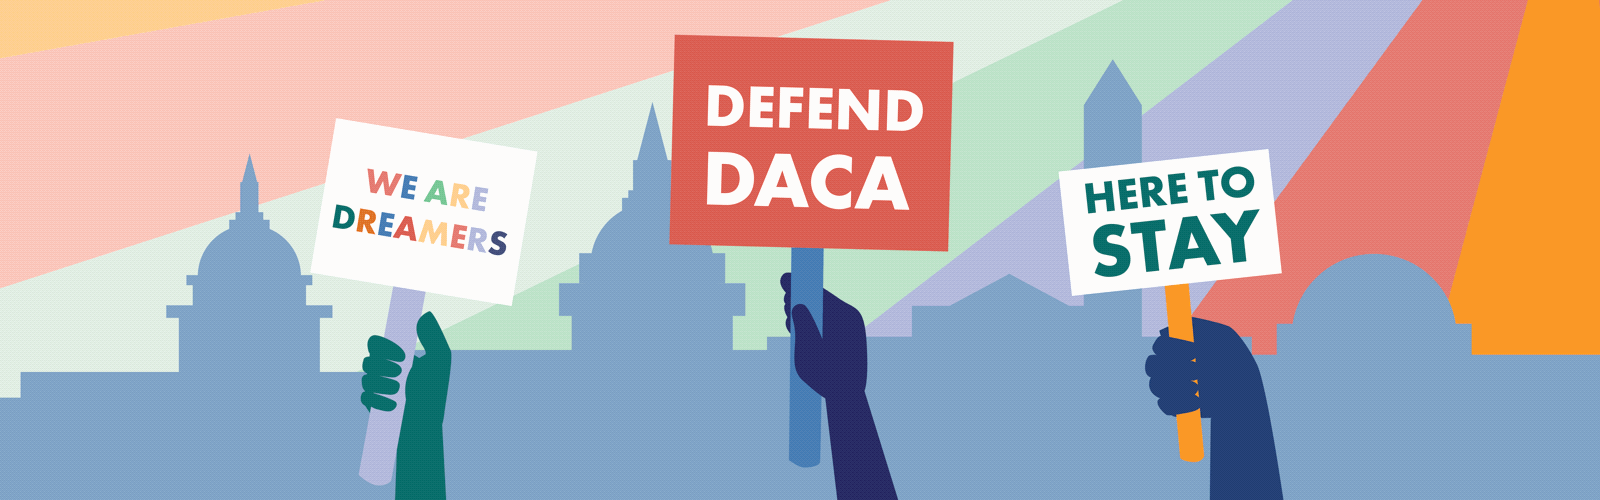 Illustration of CU Denver students holding signs in support of DACA students